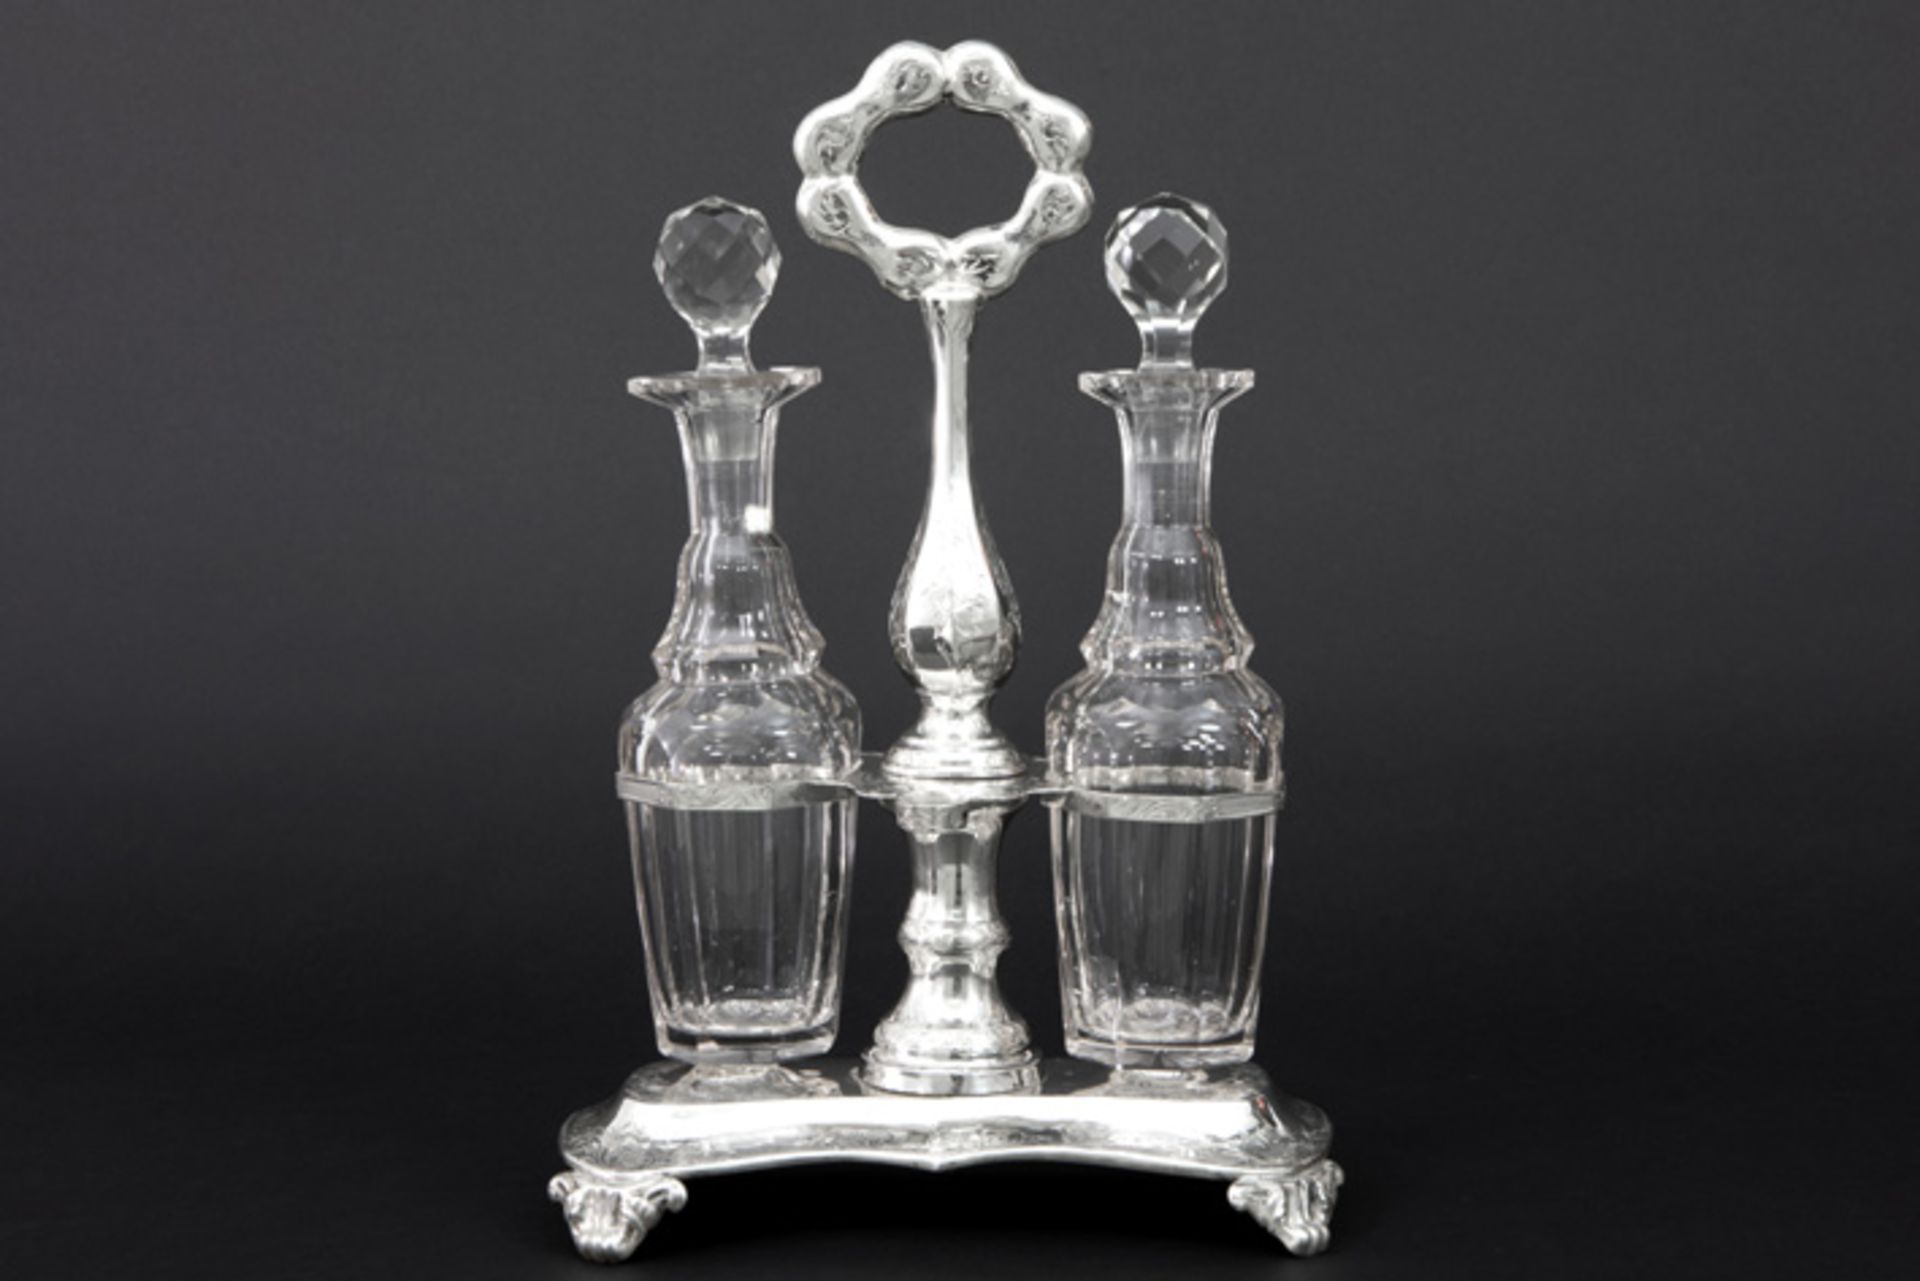 19th Cent. Dutch cruetset in "GMO" marked and 1851 dated silver and with two jugs in crystal||